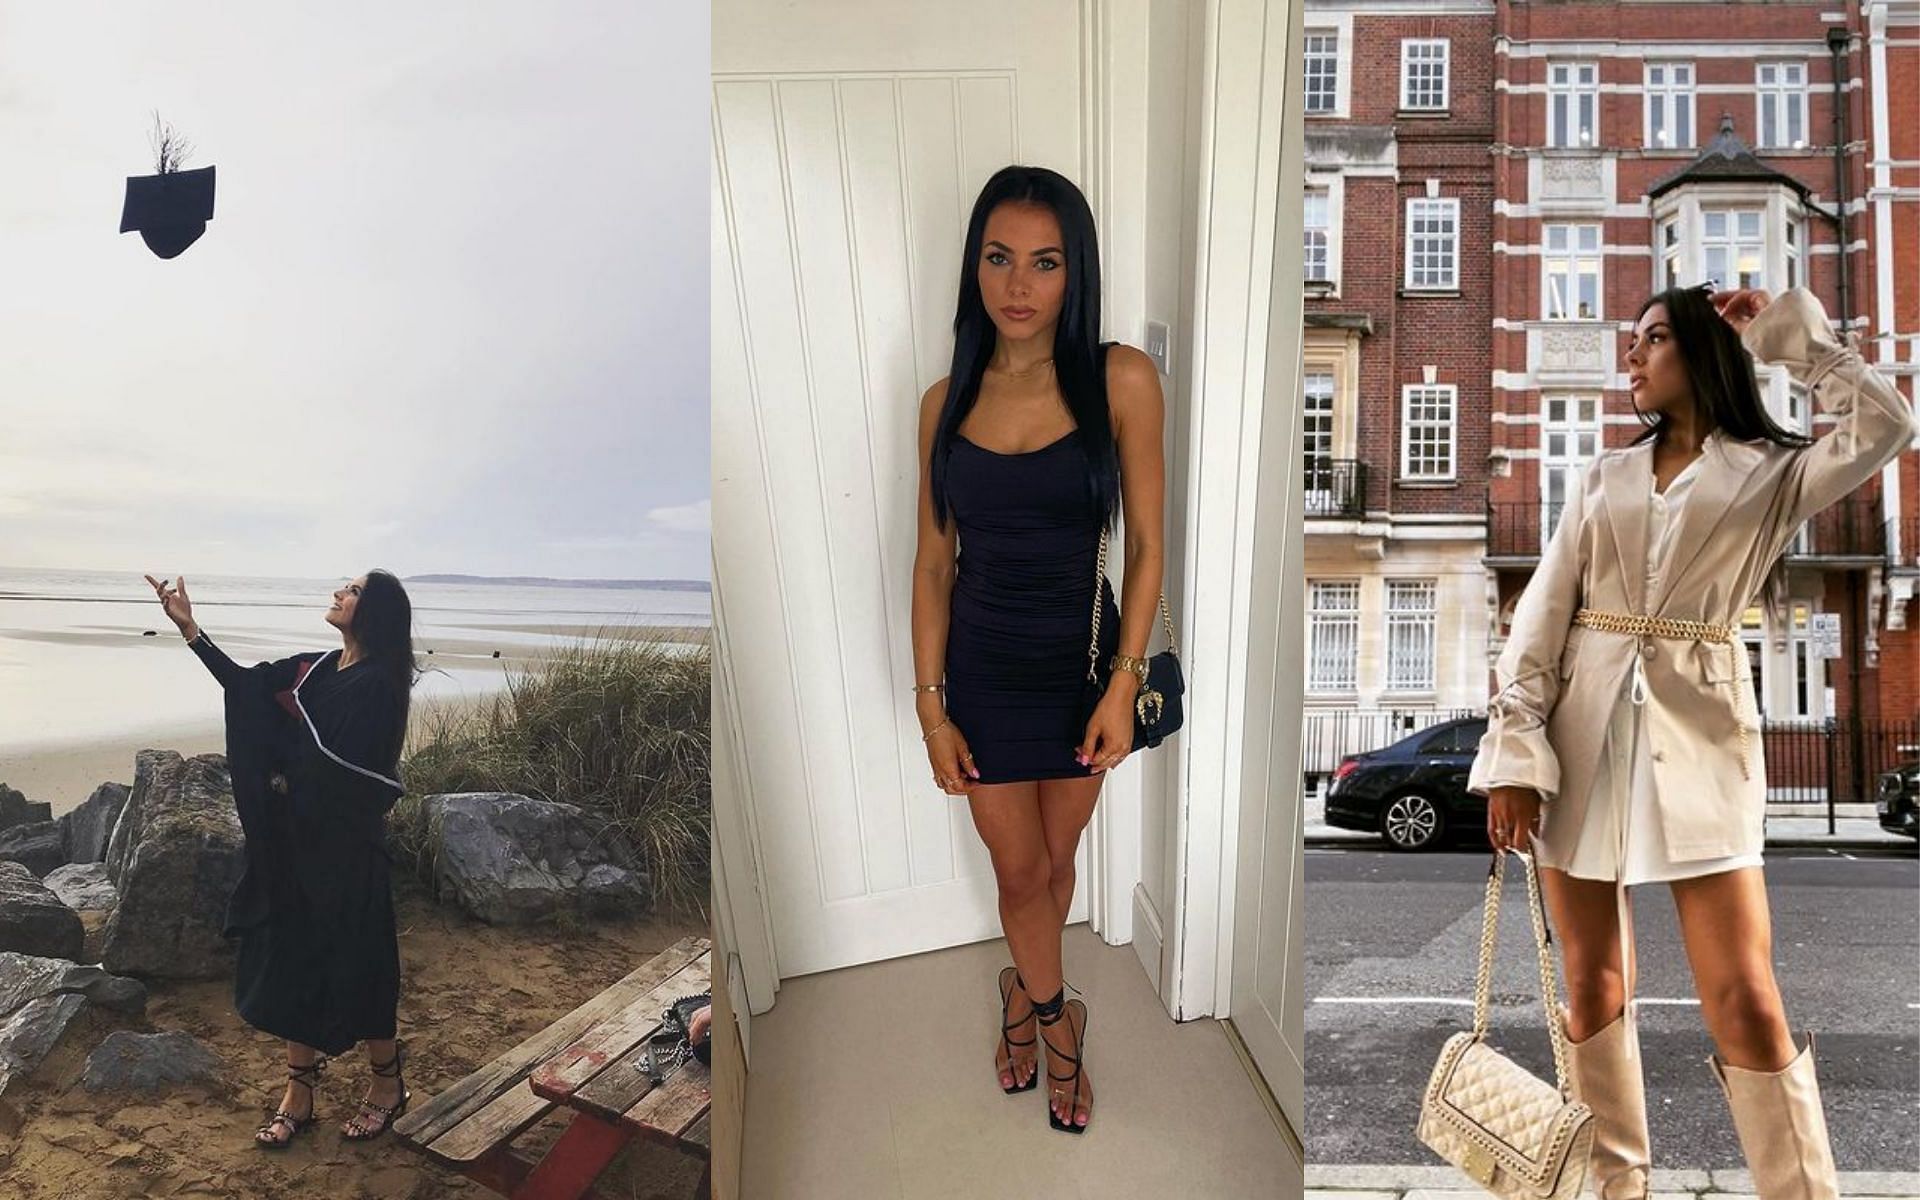 24-year old paramedic Paige Thorne will join Love Island Season 8 as a contestant (Images via paigethornex/ Instagram)